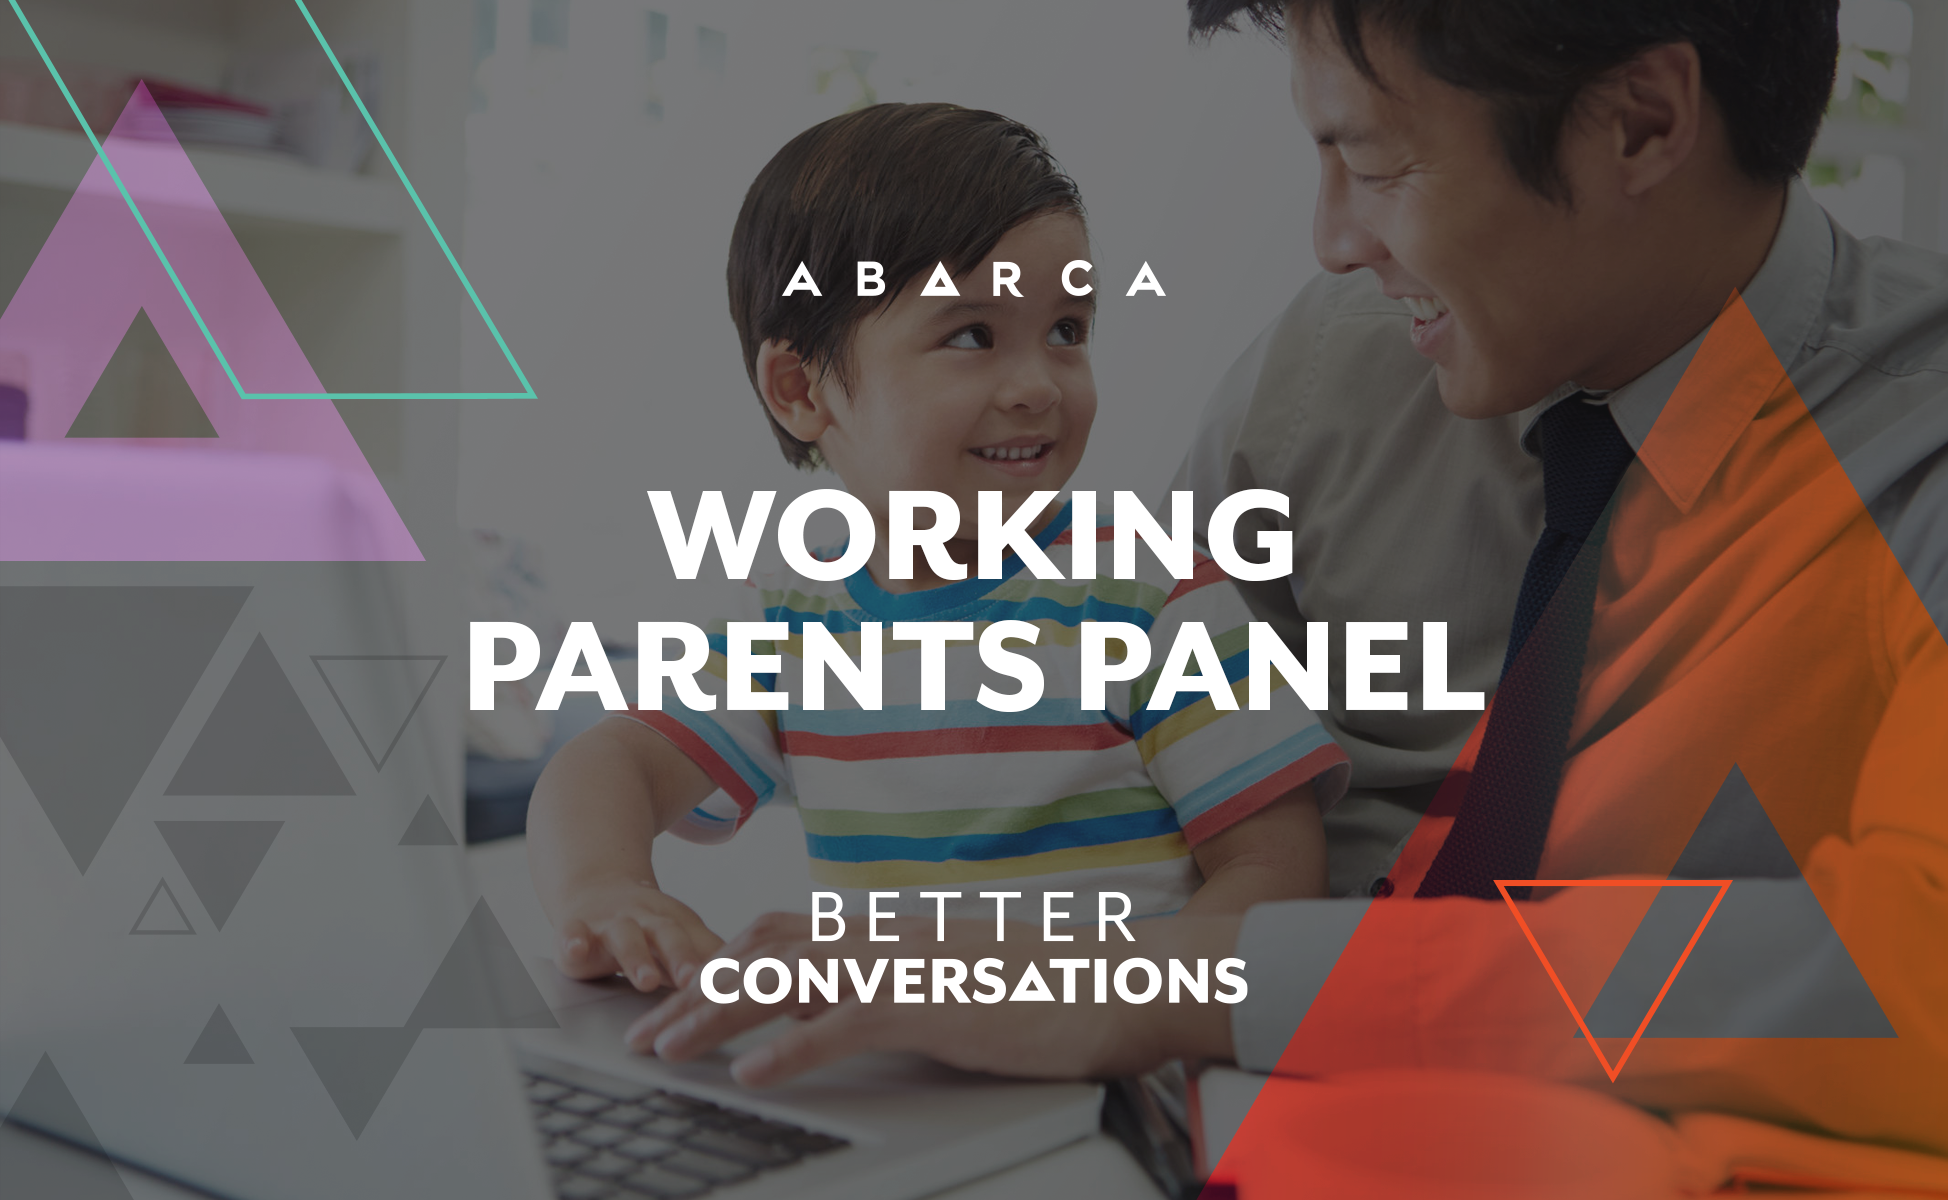 Abarca’s first Better Conversations panel on Working Parents